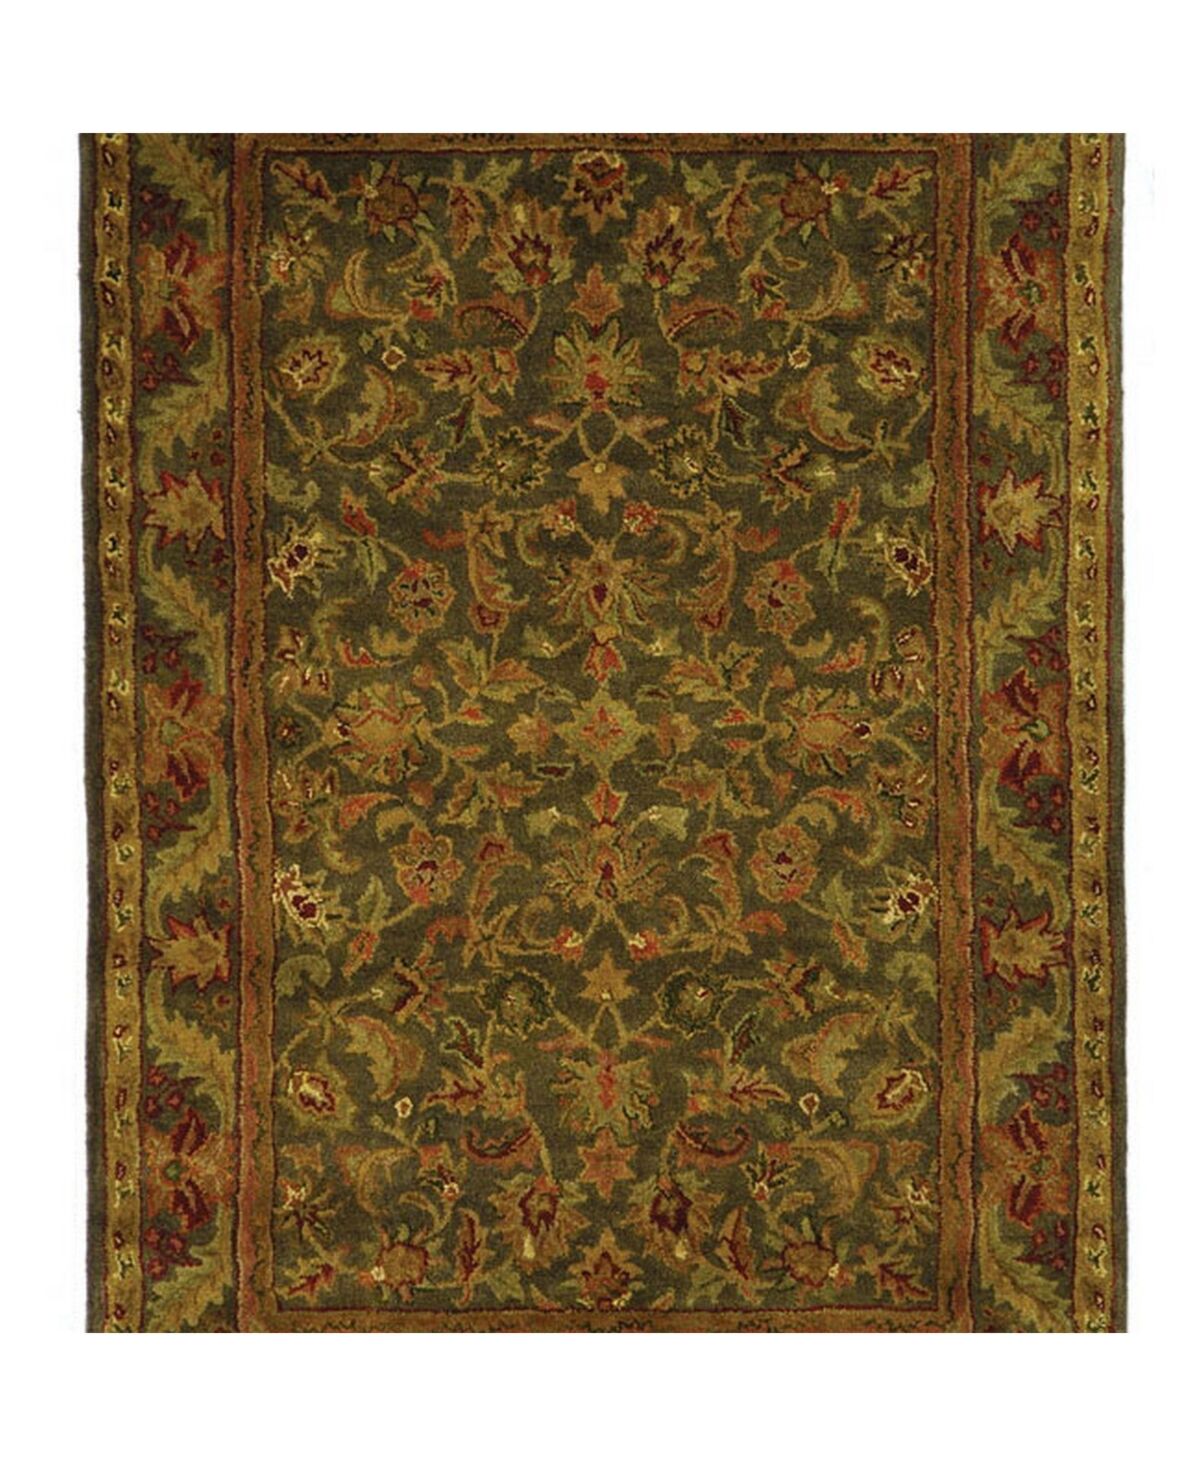 Safavieh Antiquity At52 Green and Gold 6' x 9' Area Rug - Green